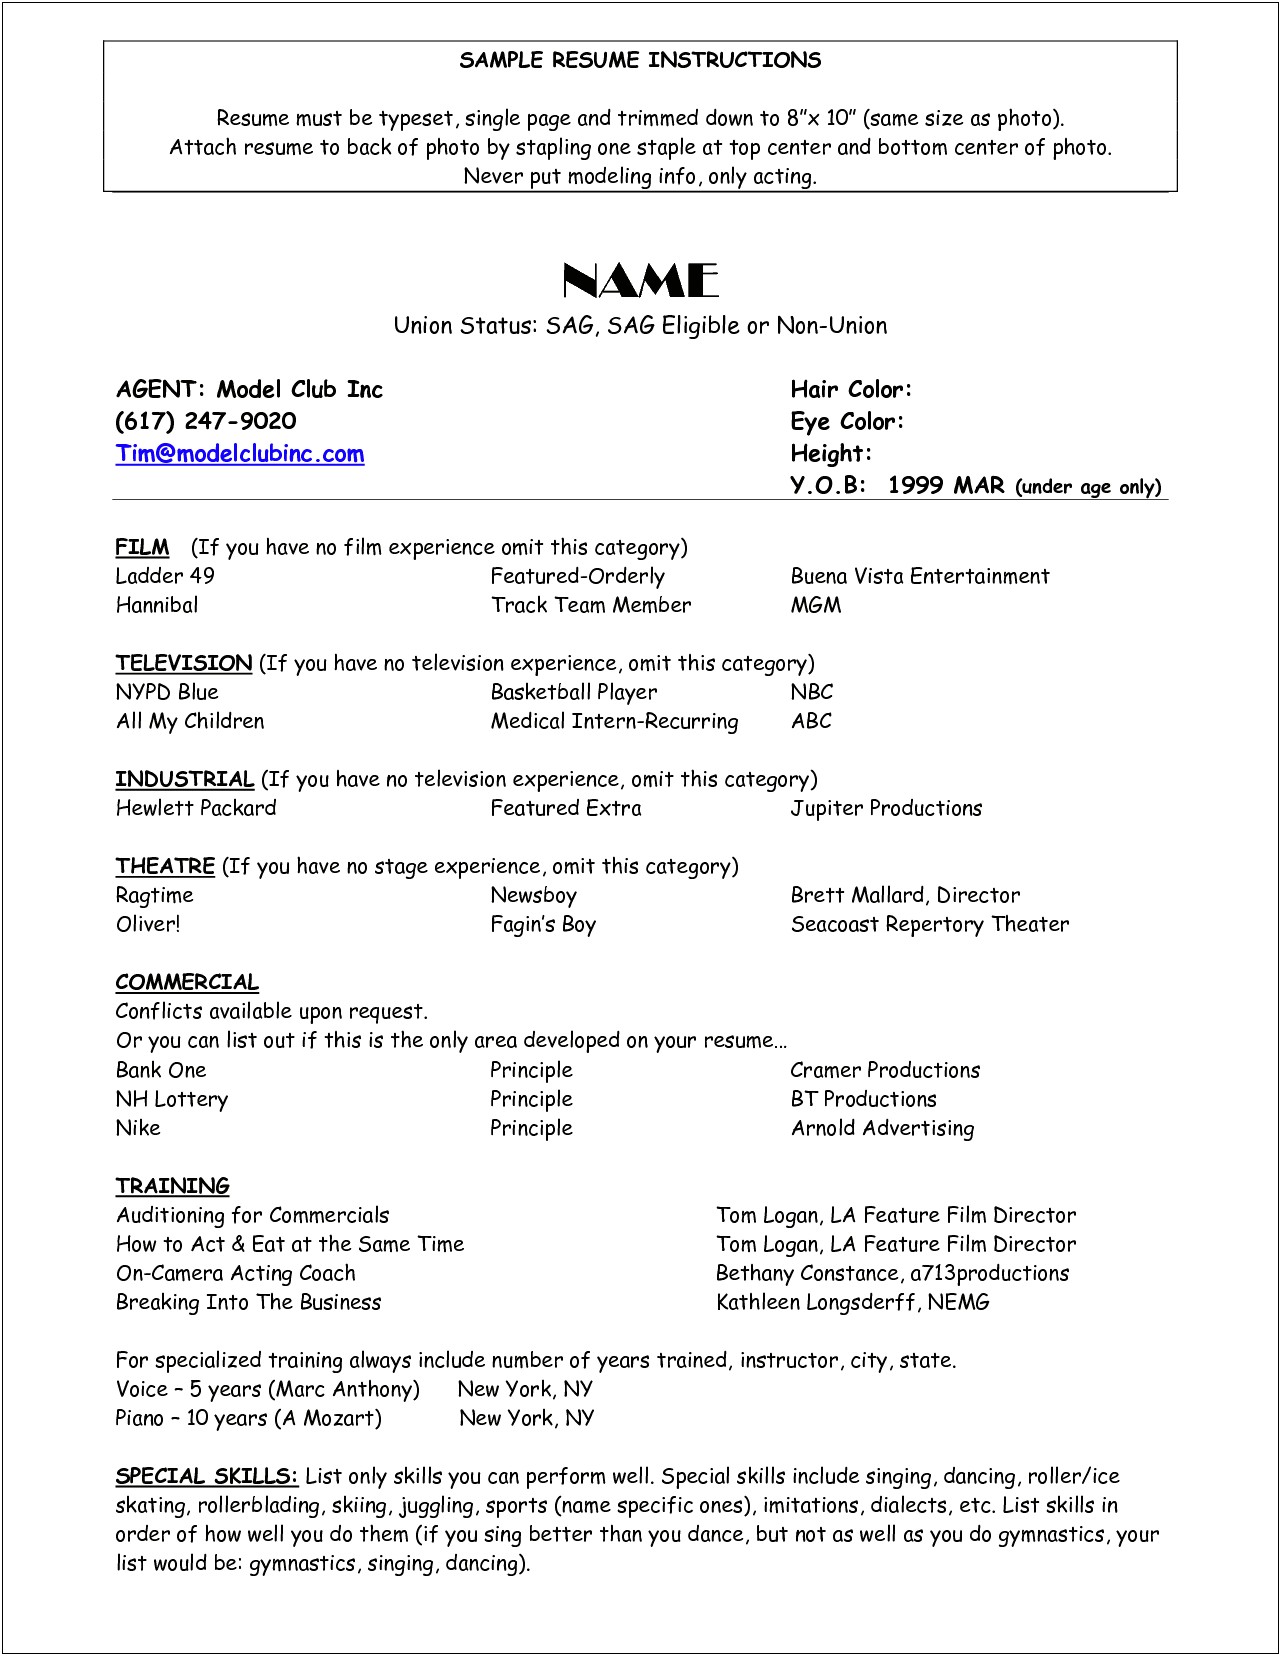 Resume For An Actor With No Experience